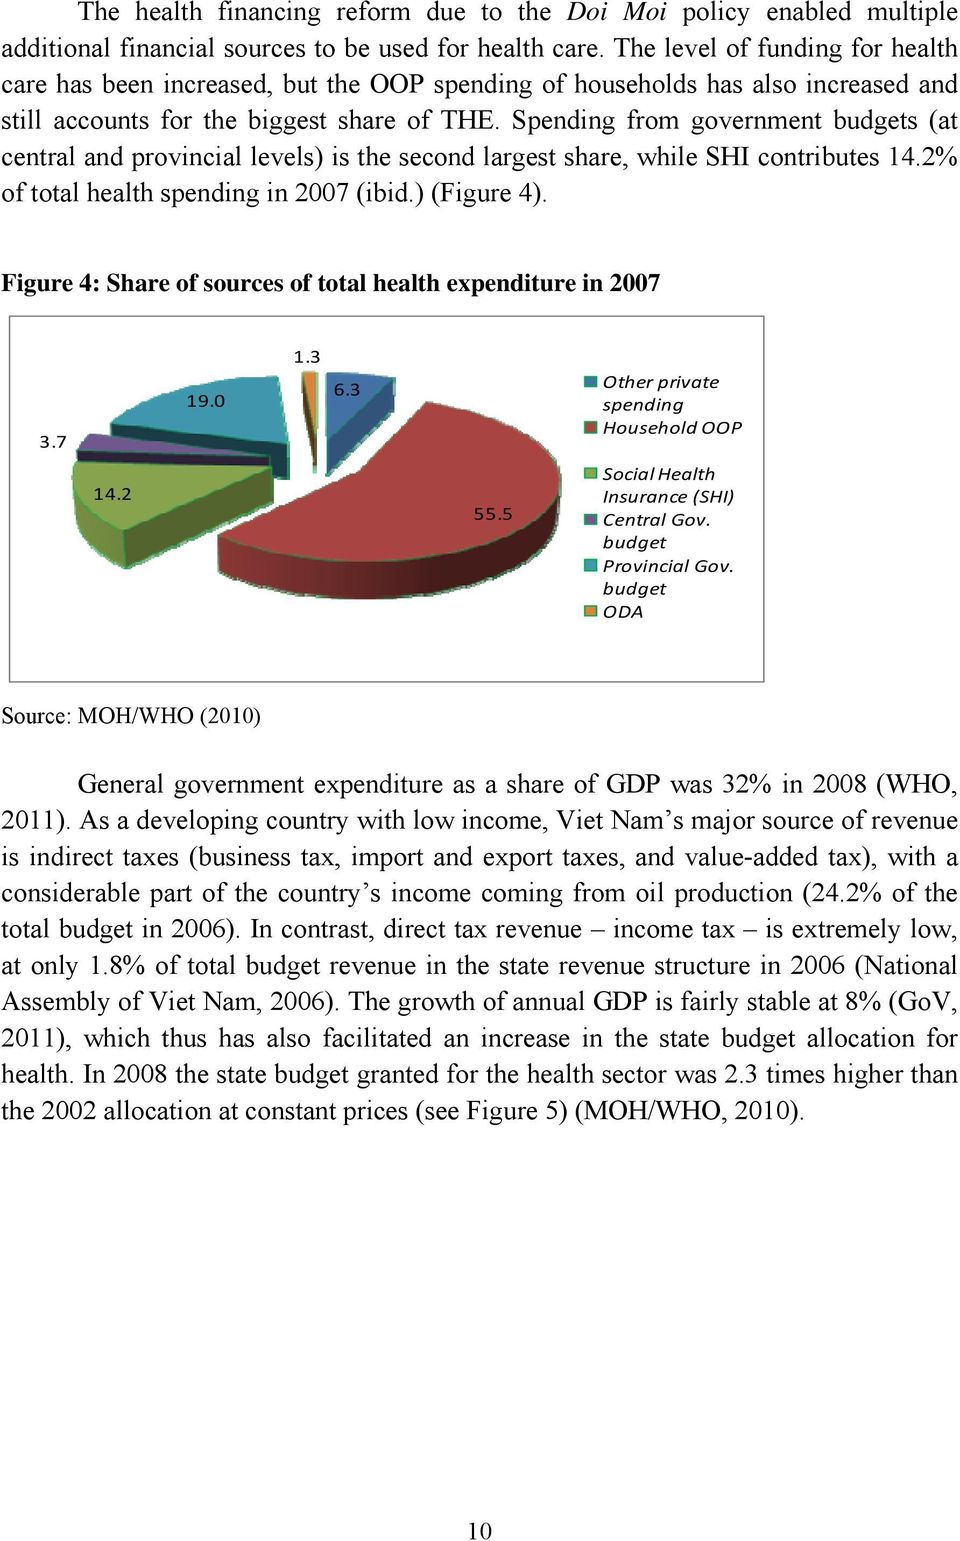 Spending from government budgets (at central and provincial levels) is the second largest share, while SHI contributes 14.2% of total health spending in 2007 (ibid.) (Figure 4).